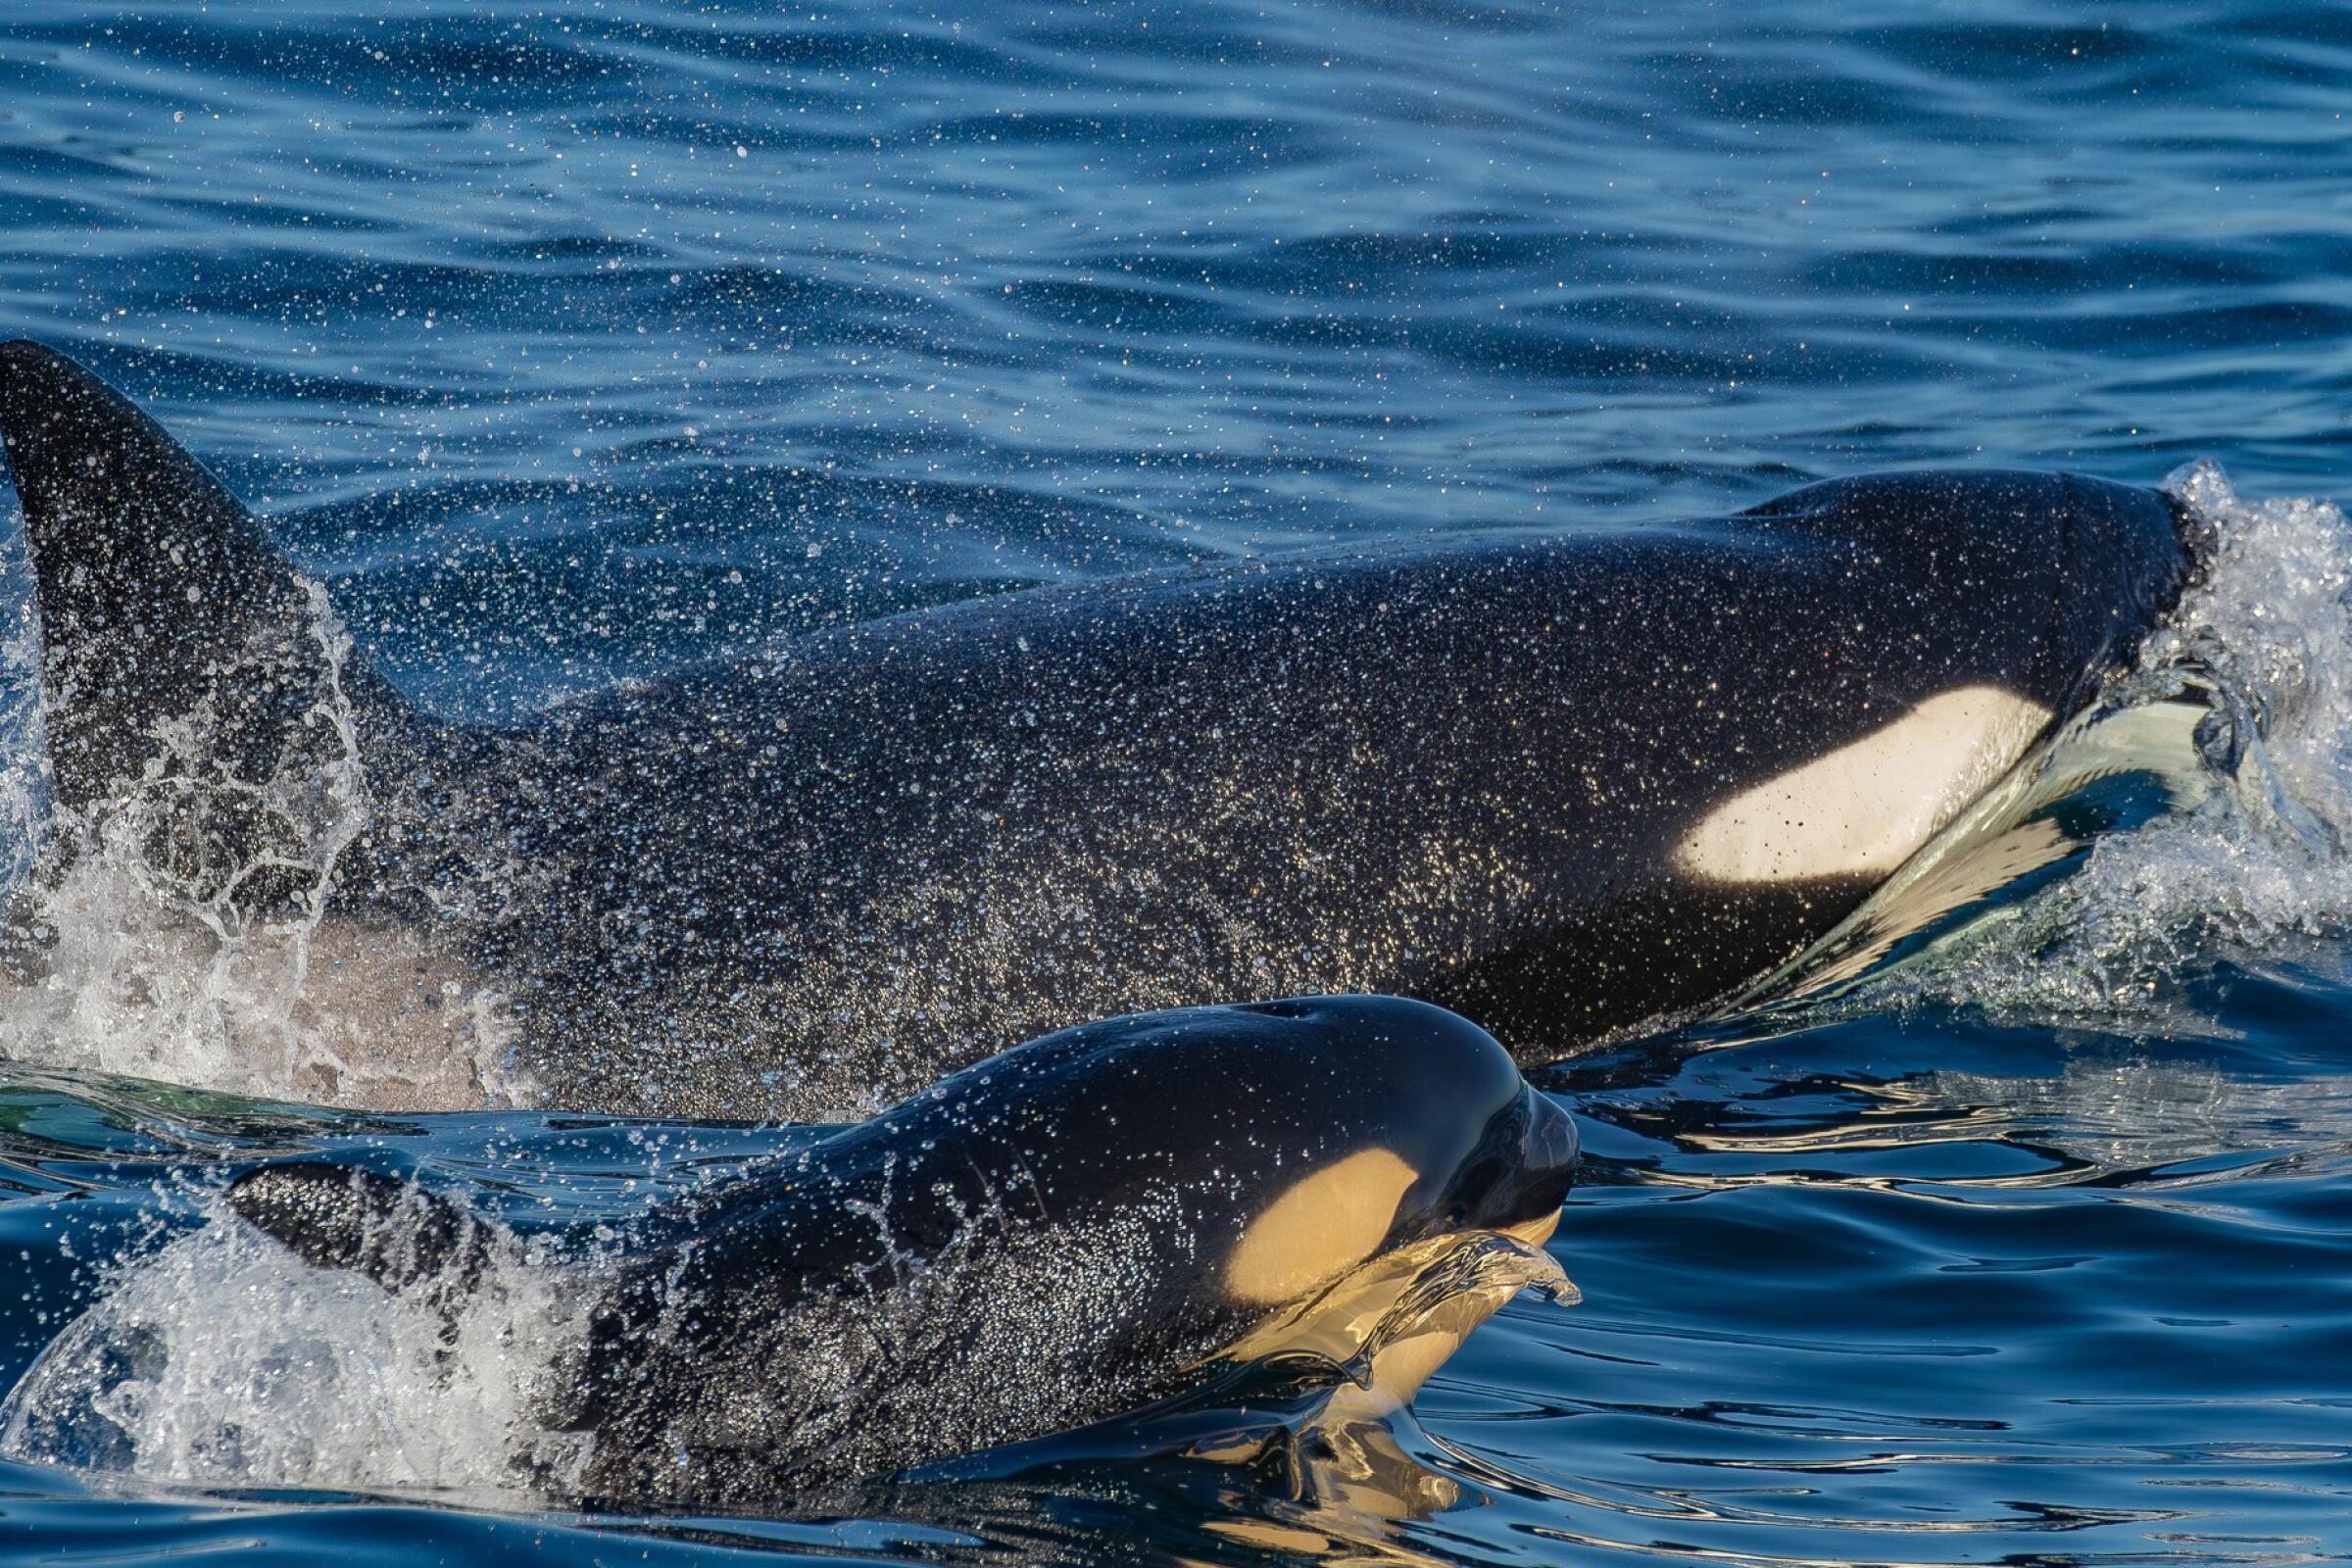 A young killer whale swims alongside a larger orca 